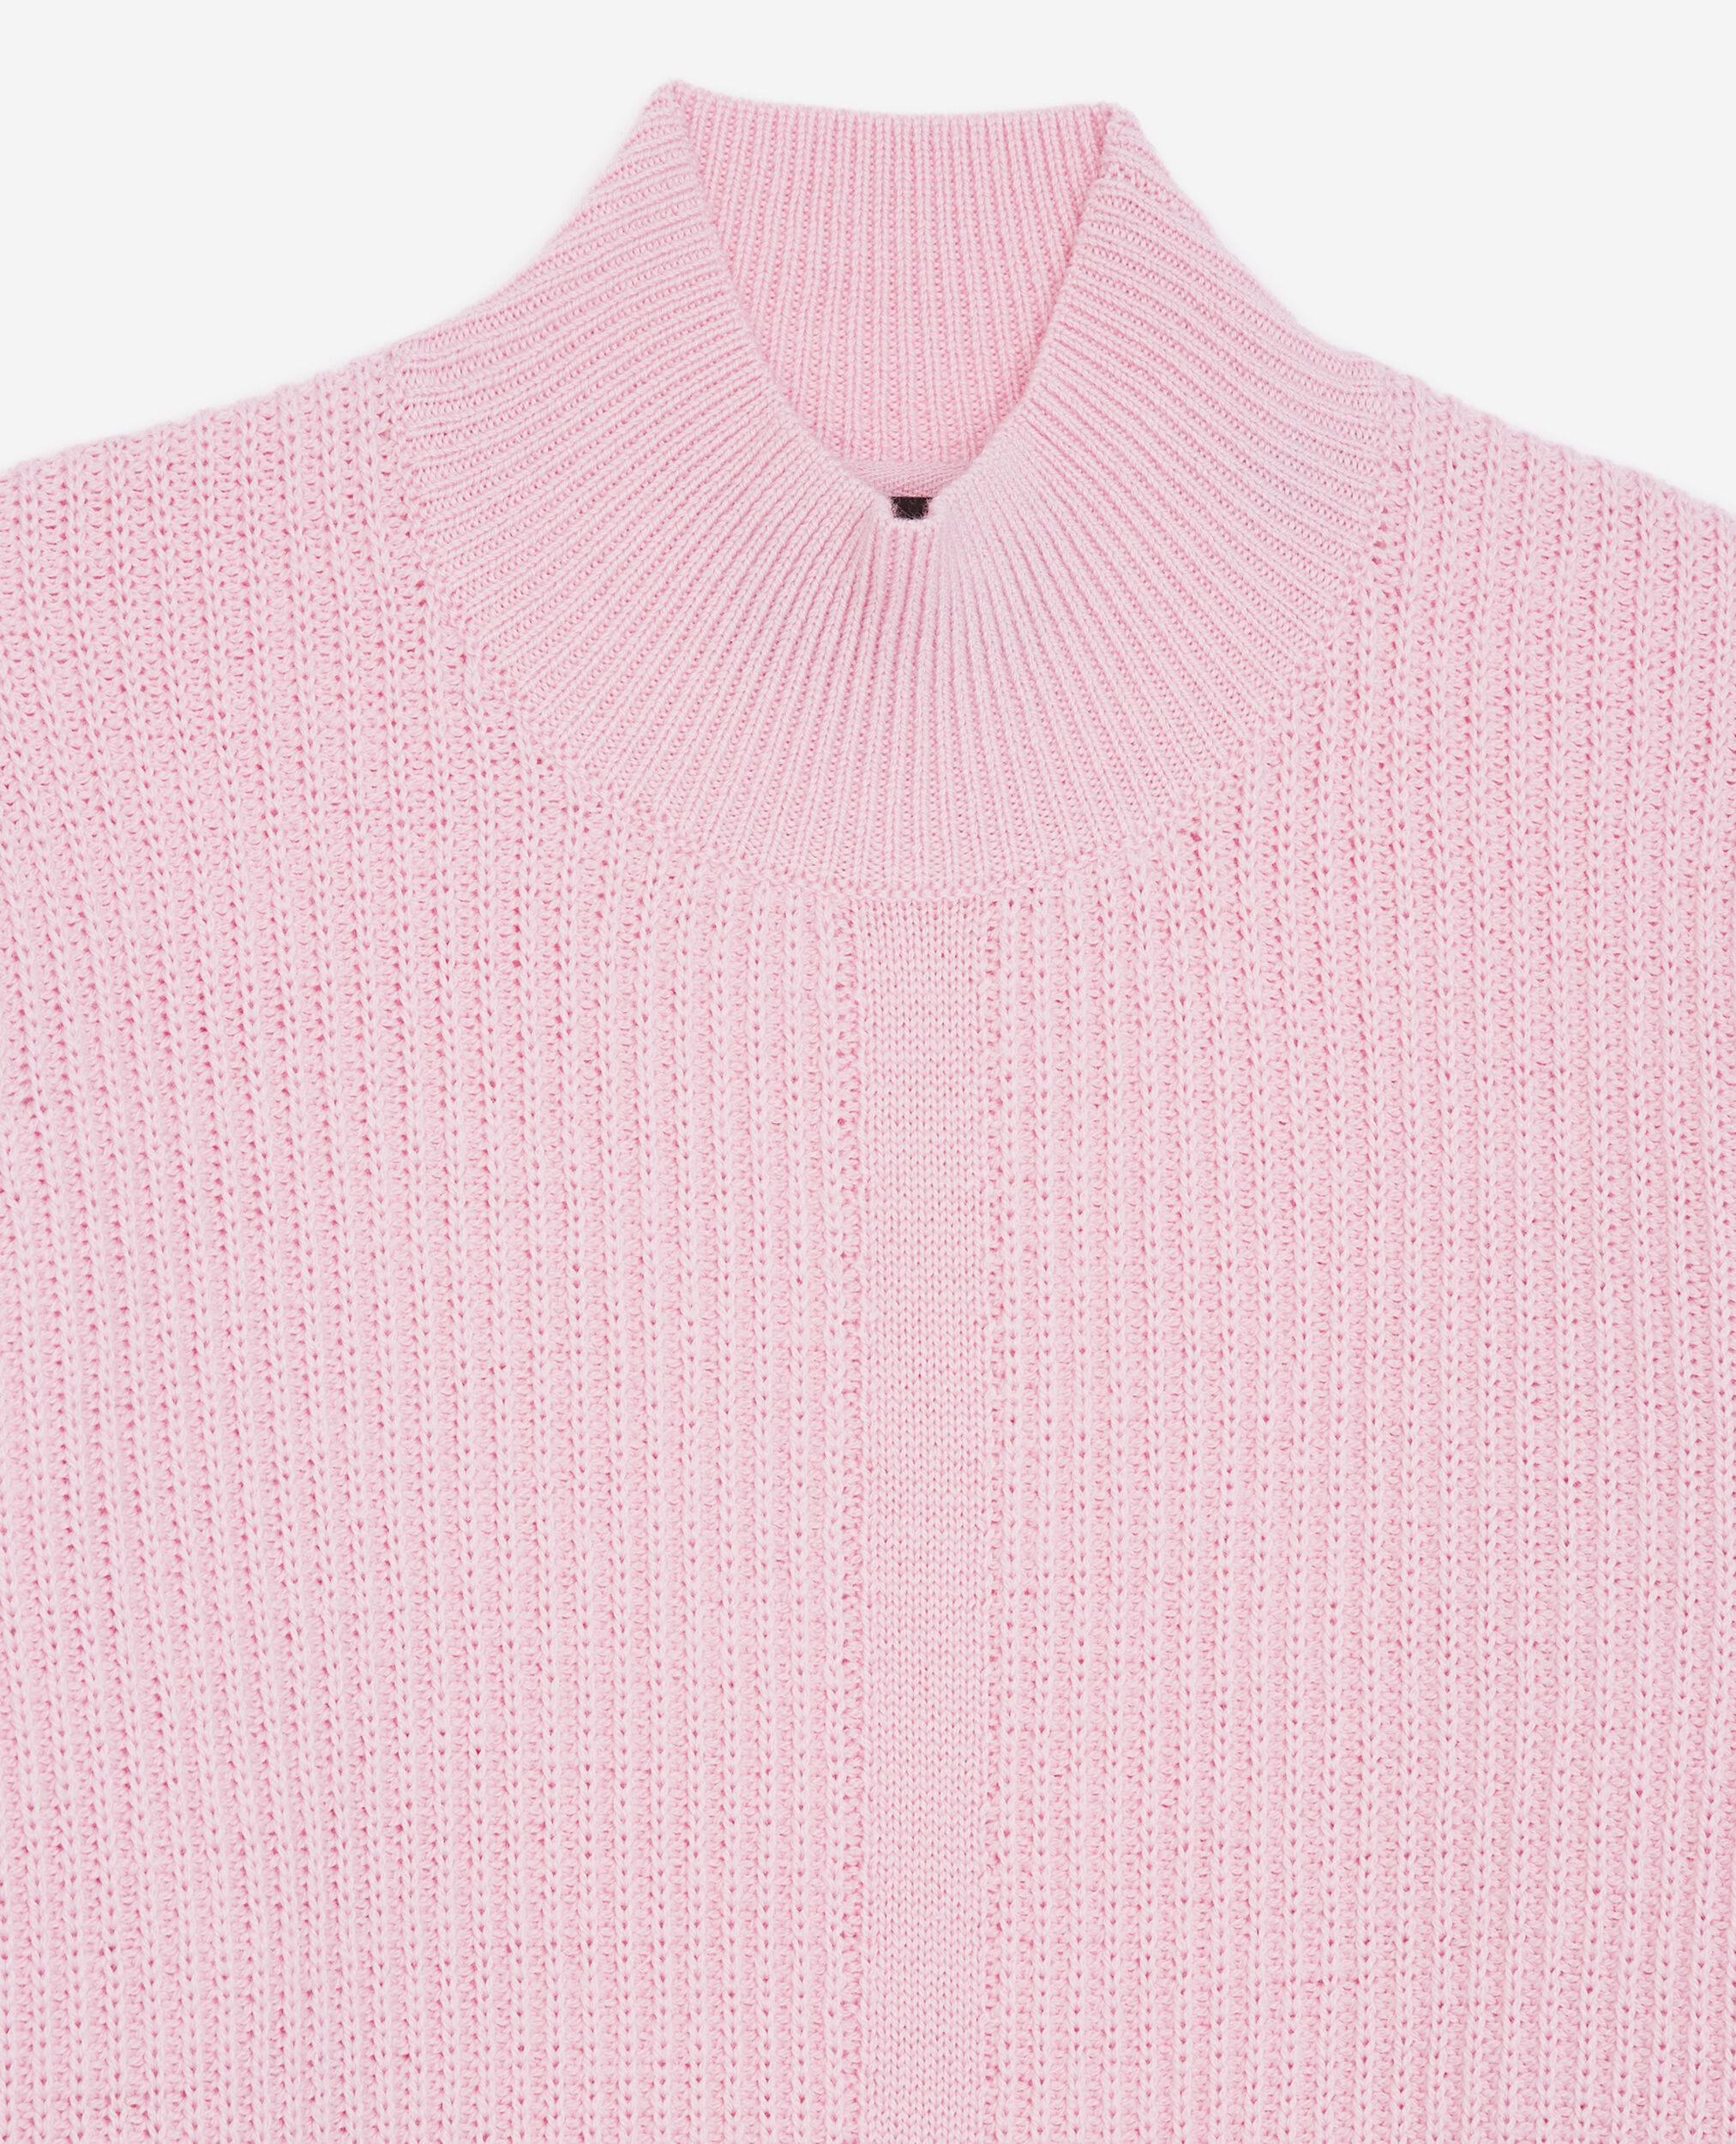 Pull laine mérinos rose clair ample, PINK, hi-res image number null